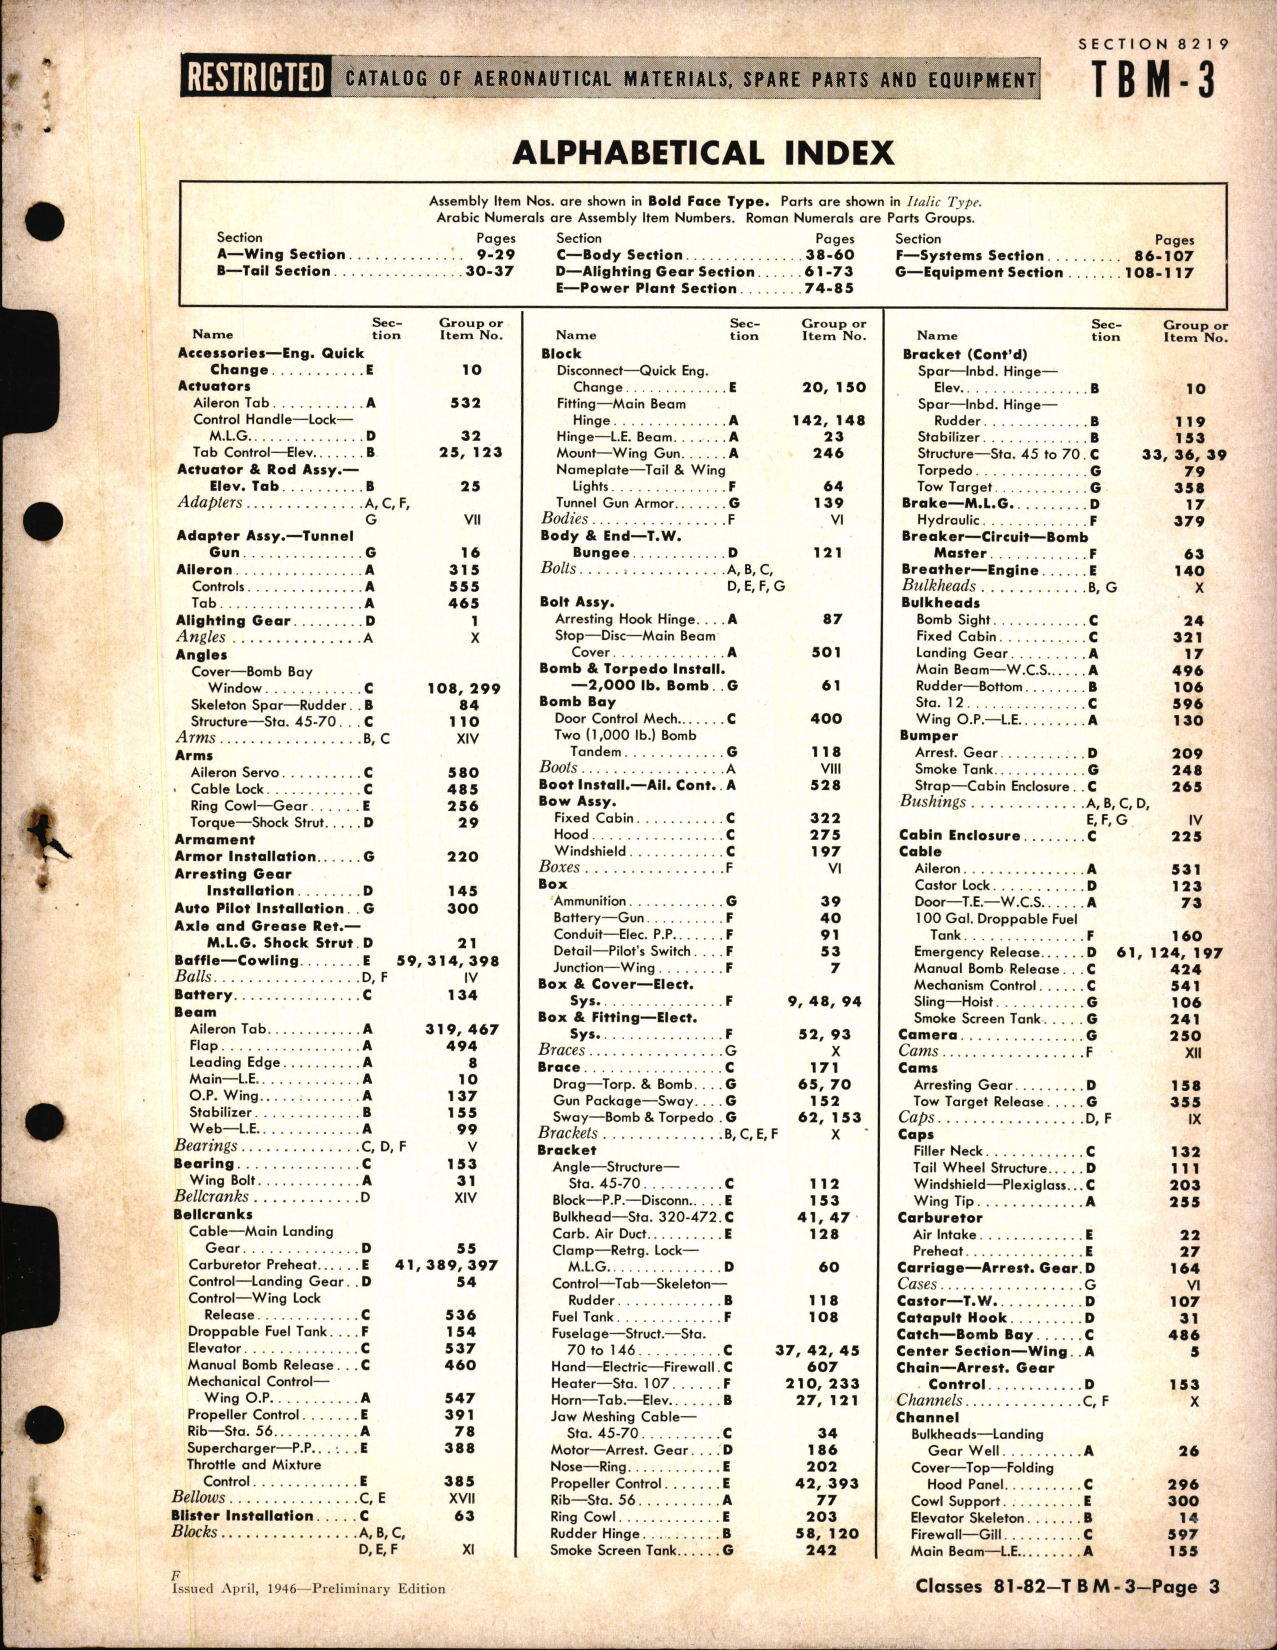 Sample page 3 from AirCorps Library document: TBM-3 Avenger Availability List and Airframe Spare Parts